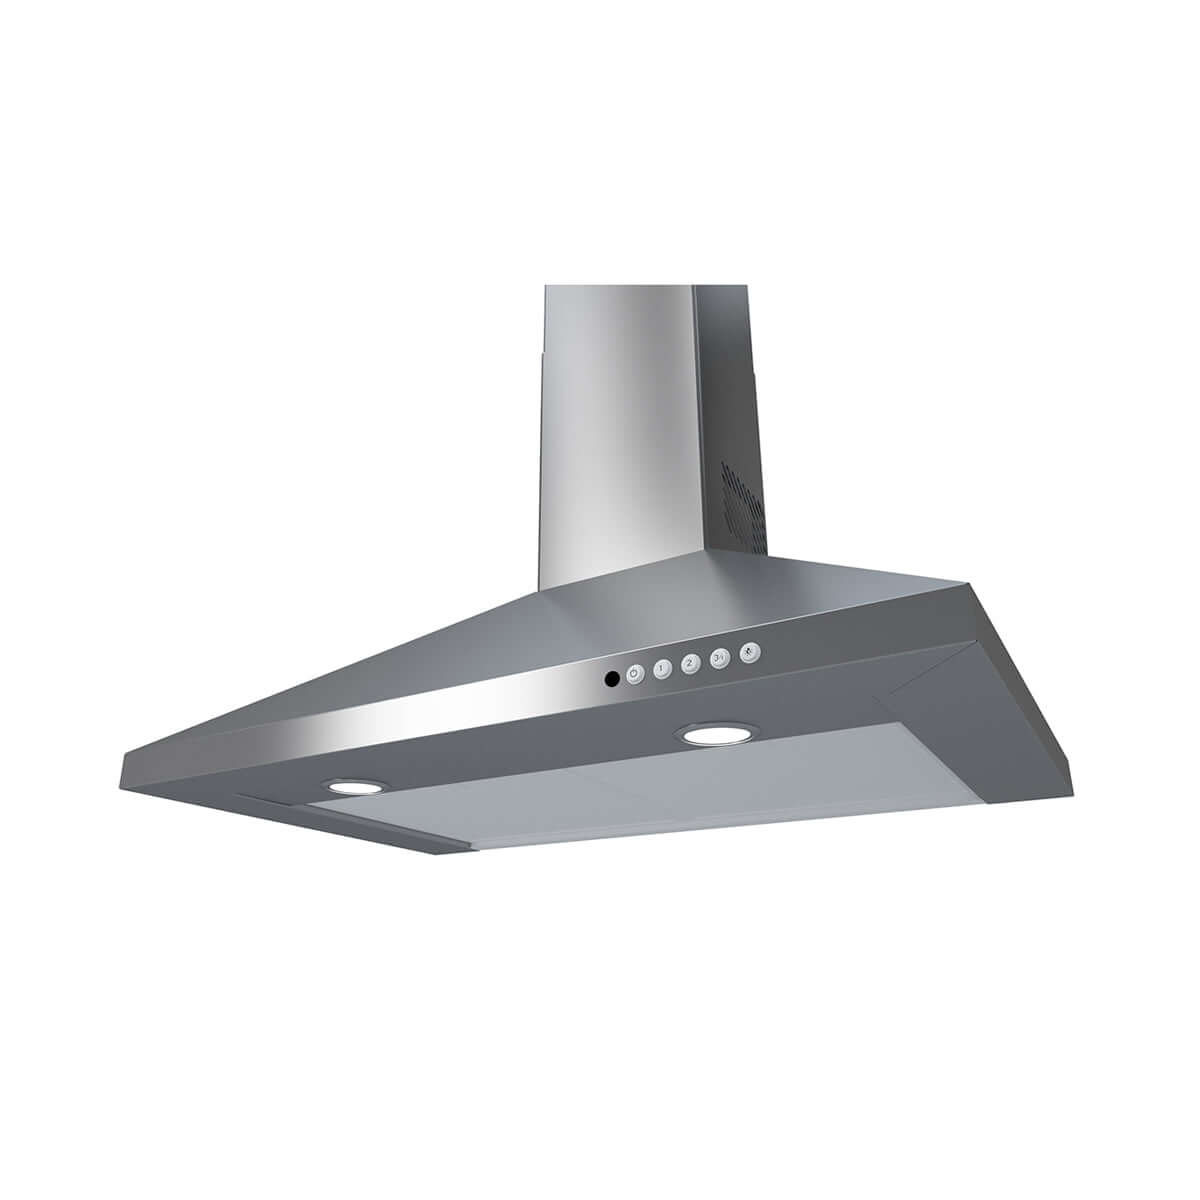 Faber Classica Plus Wall Mount Range Hood With Size Options In Stainless Steel 